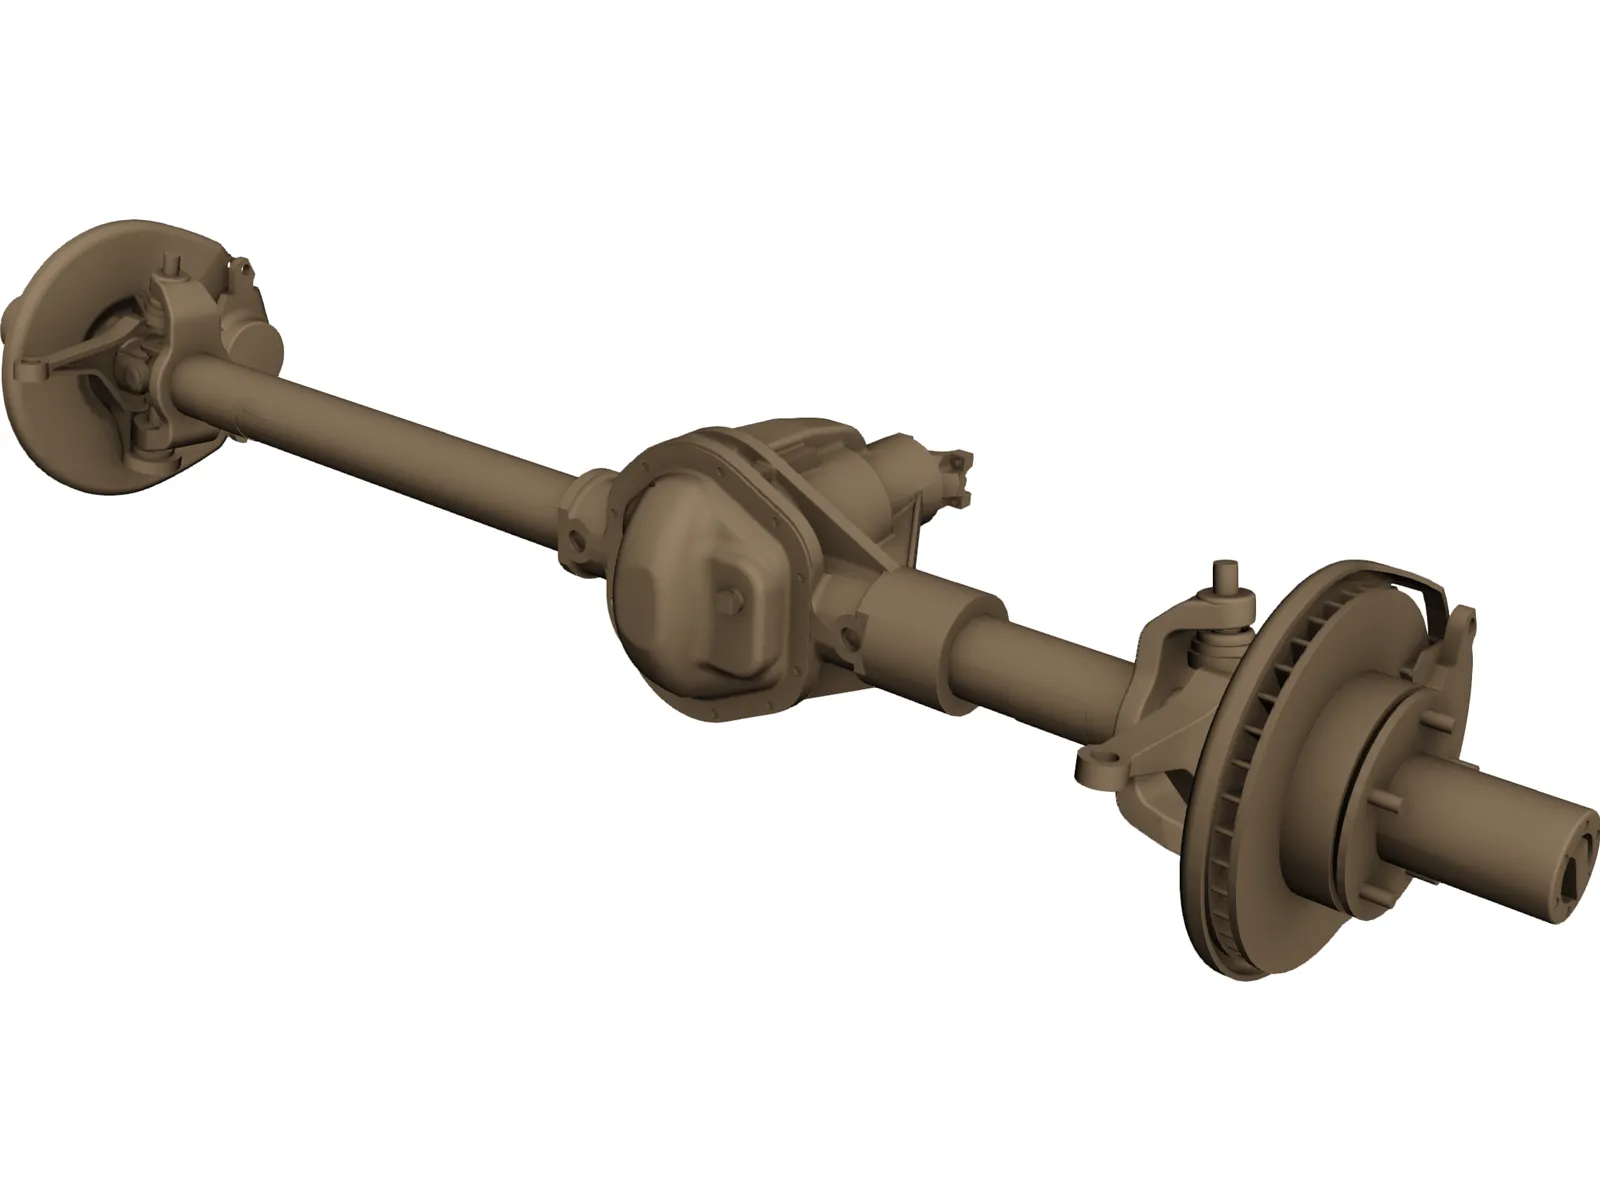 Ford High Pinion Dana 44 Front Axle 3D Model